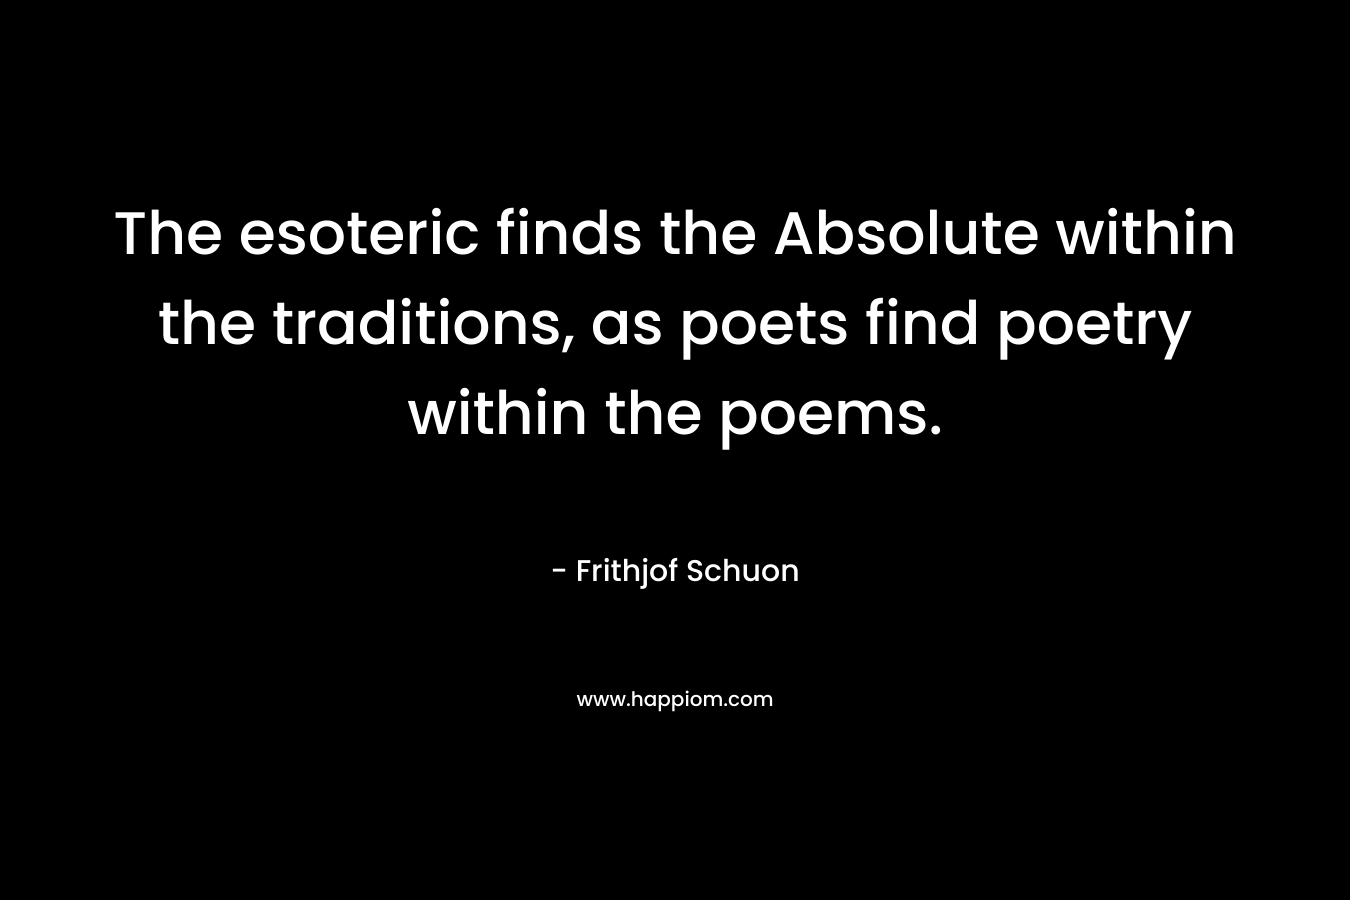 The esoteric finds the Absolute within the traditions, as poets find poetry within the poems.